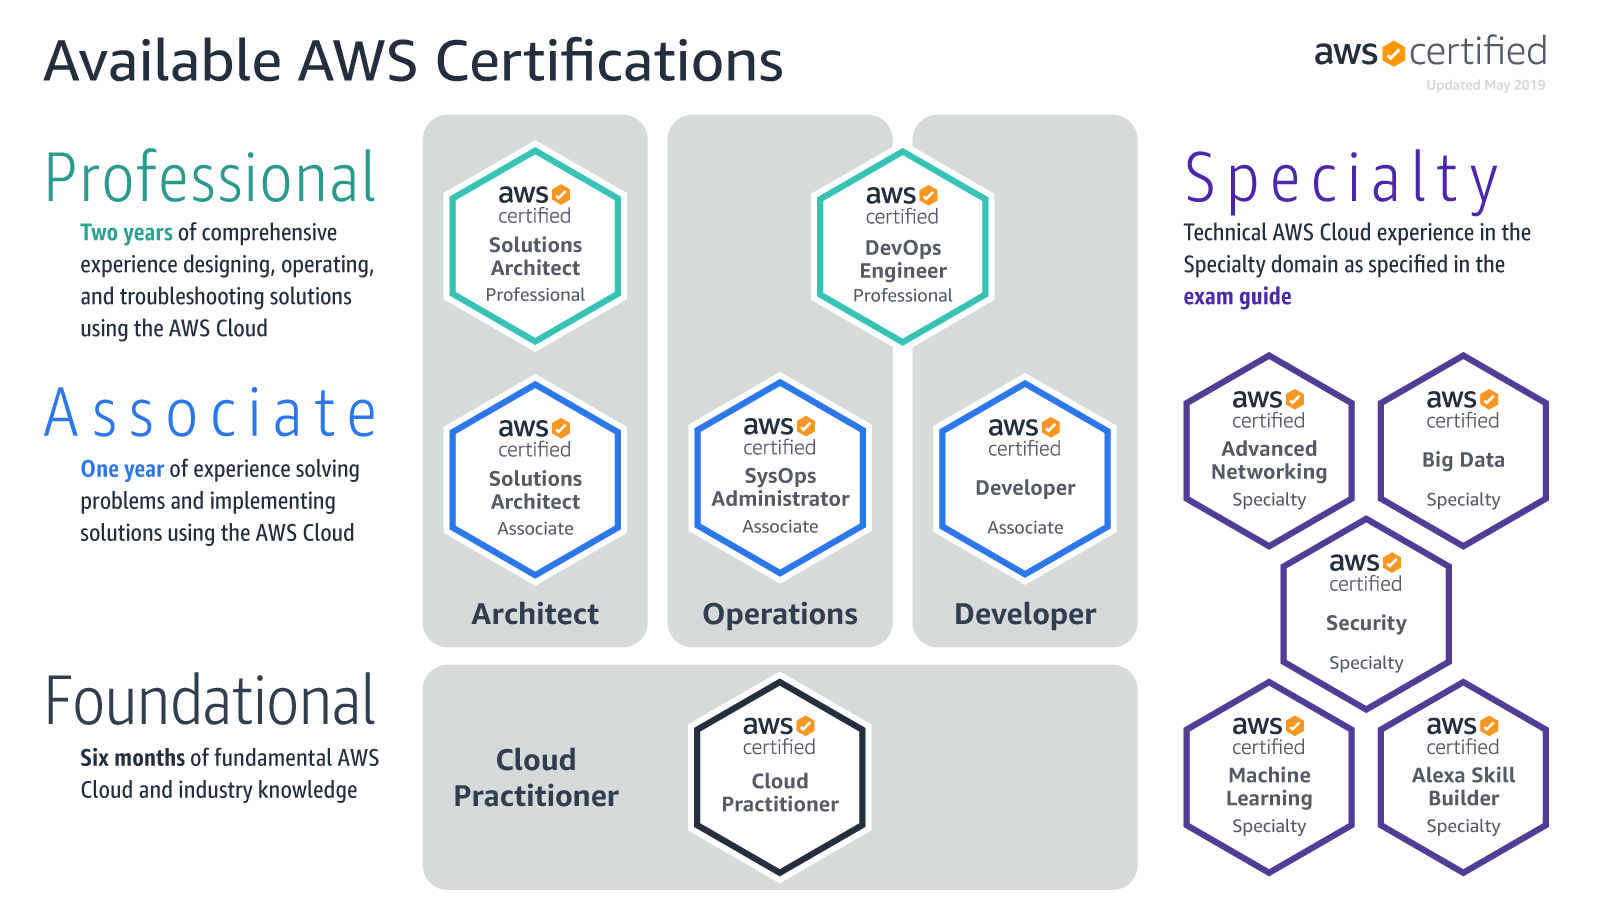 Available AWS Certification